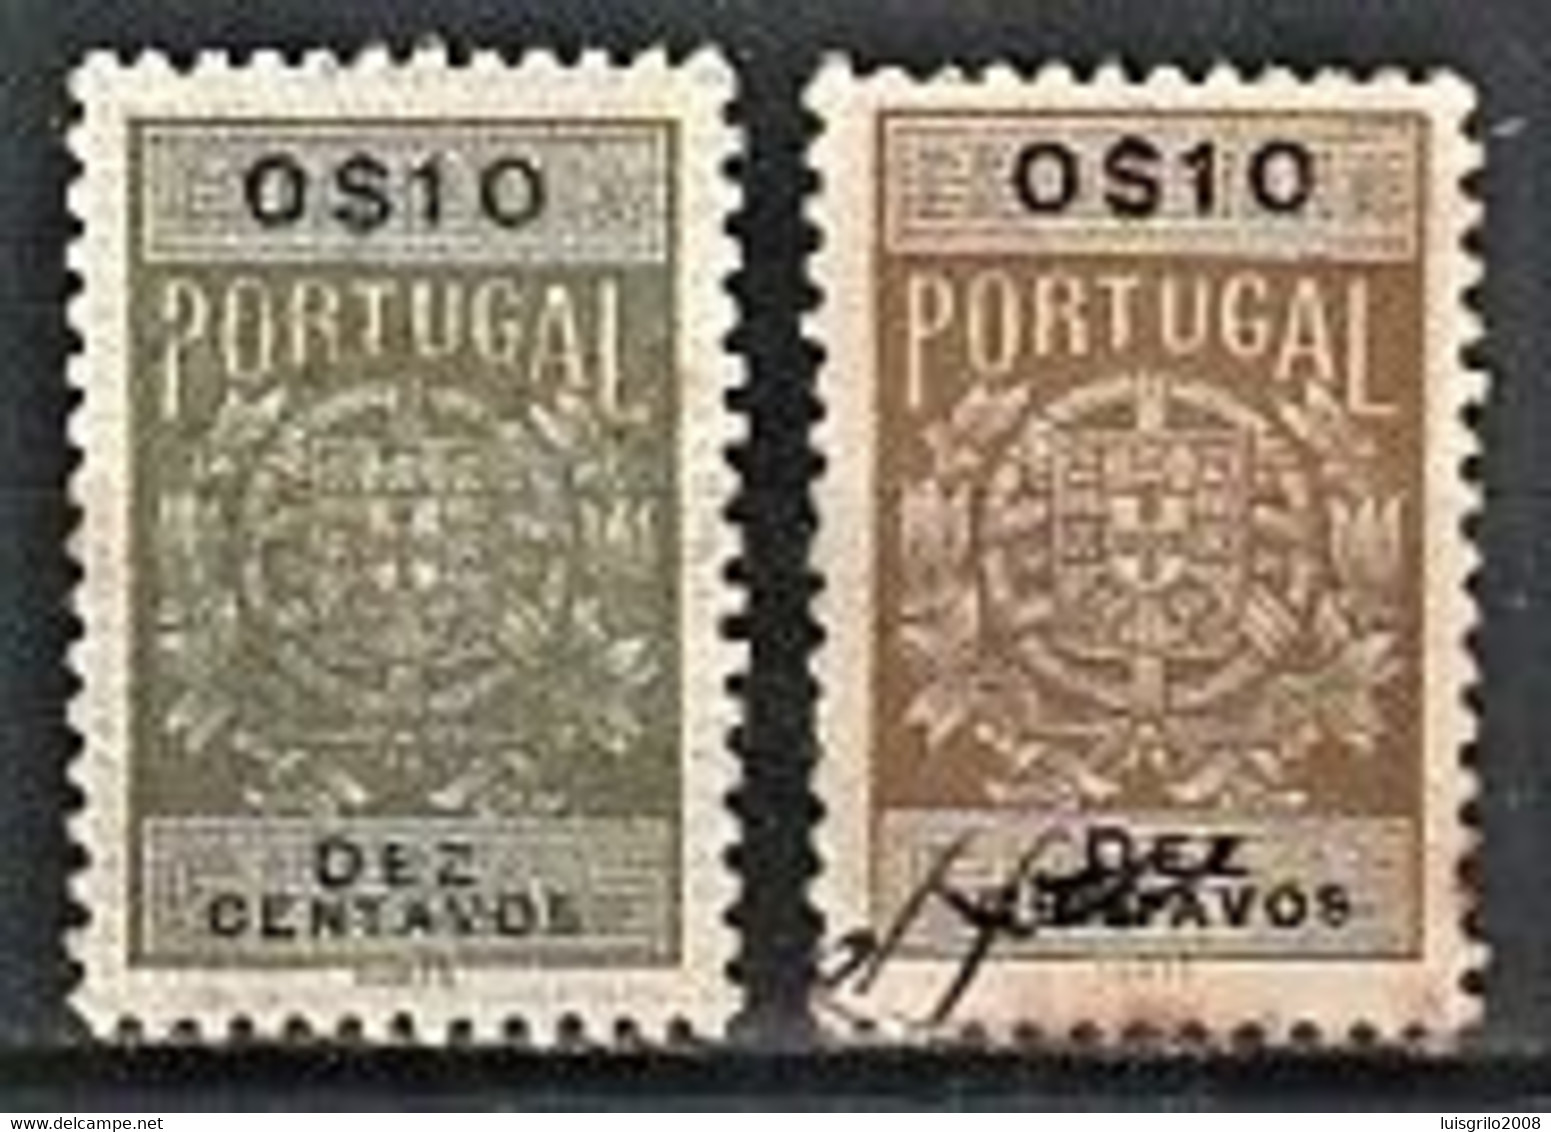 Fiscal/ Revenue, Portugal 1940 - Estampilha Fiscal -|- 0$10 - COLOR VARIANT - Is The Stamp Of The Right - Oblitérés